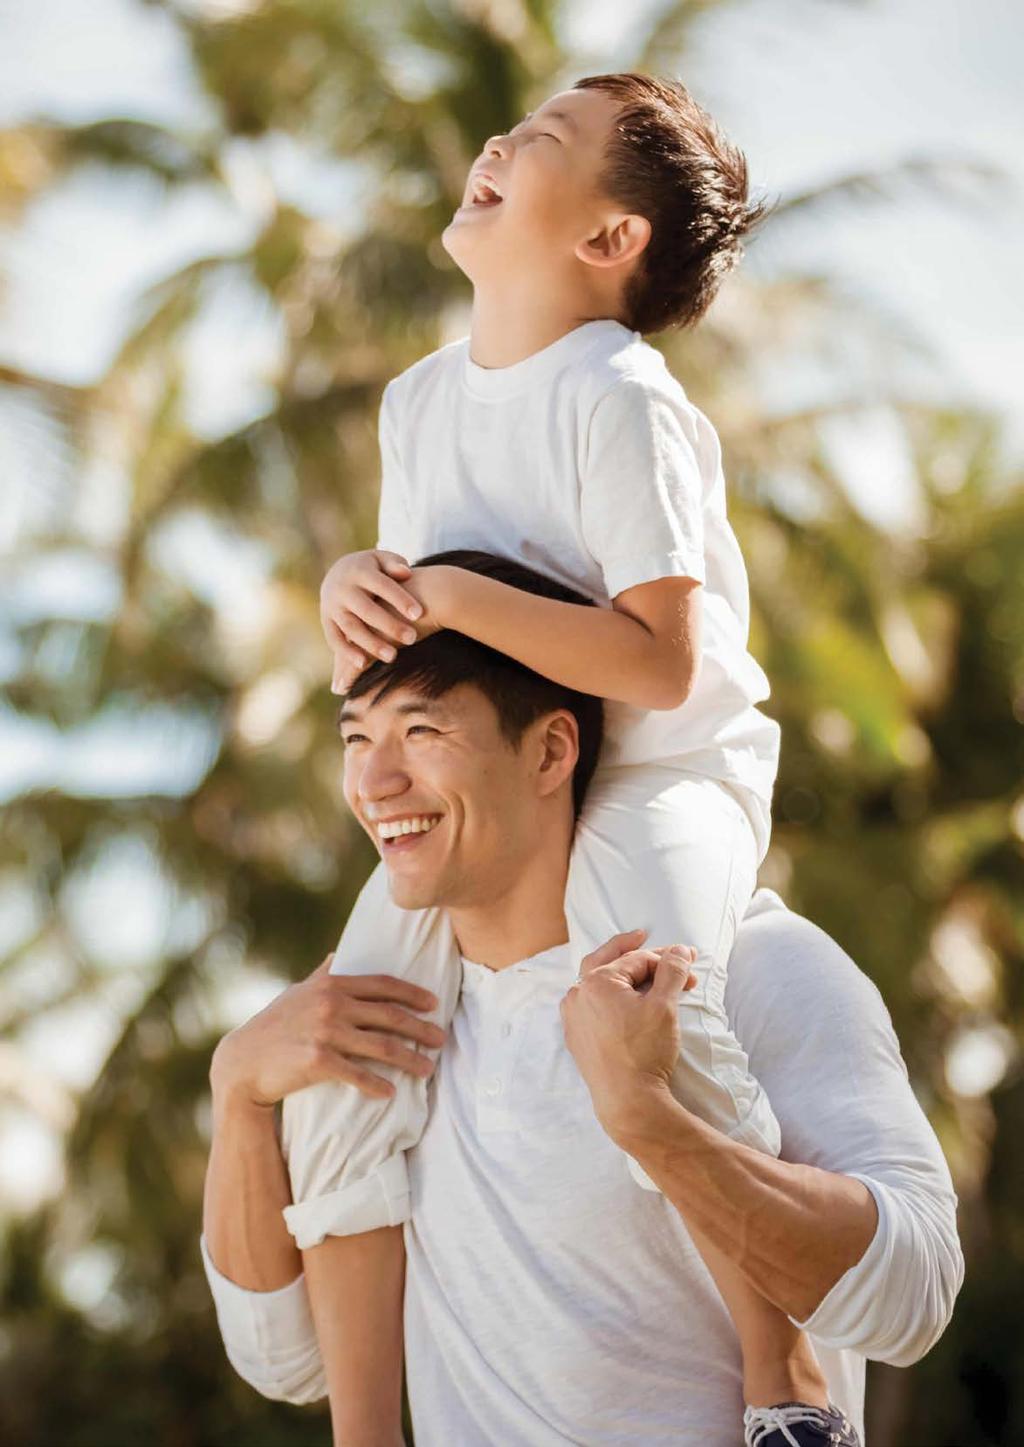 Families FAMILY IS AT THE HEART OF ONE&ONLY SANYA. TO ENSURE THE TIME YOU SPEND TOGETHER IS FOREVER CHERISHED, THE RESORT OFFERS A VARIED AND ENGAGING COLLECTION OF FAMILY PURSUITS AND ACTIVITIES.